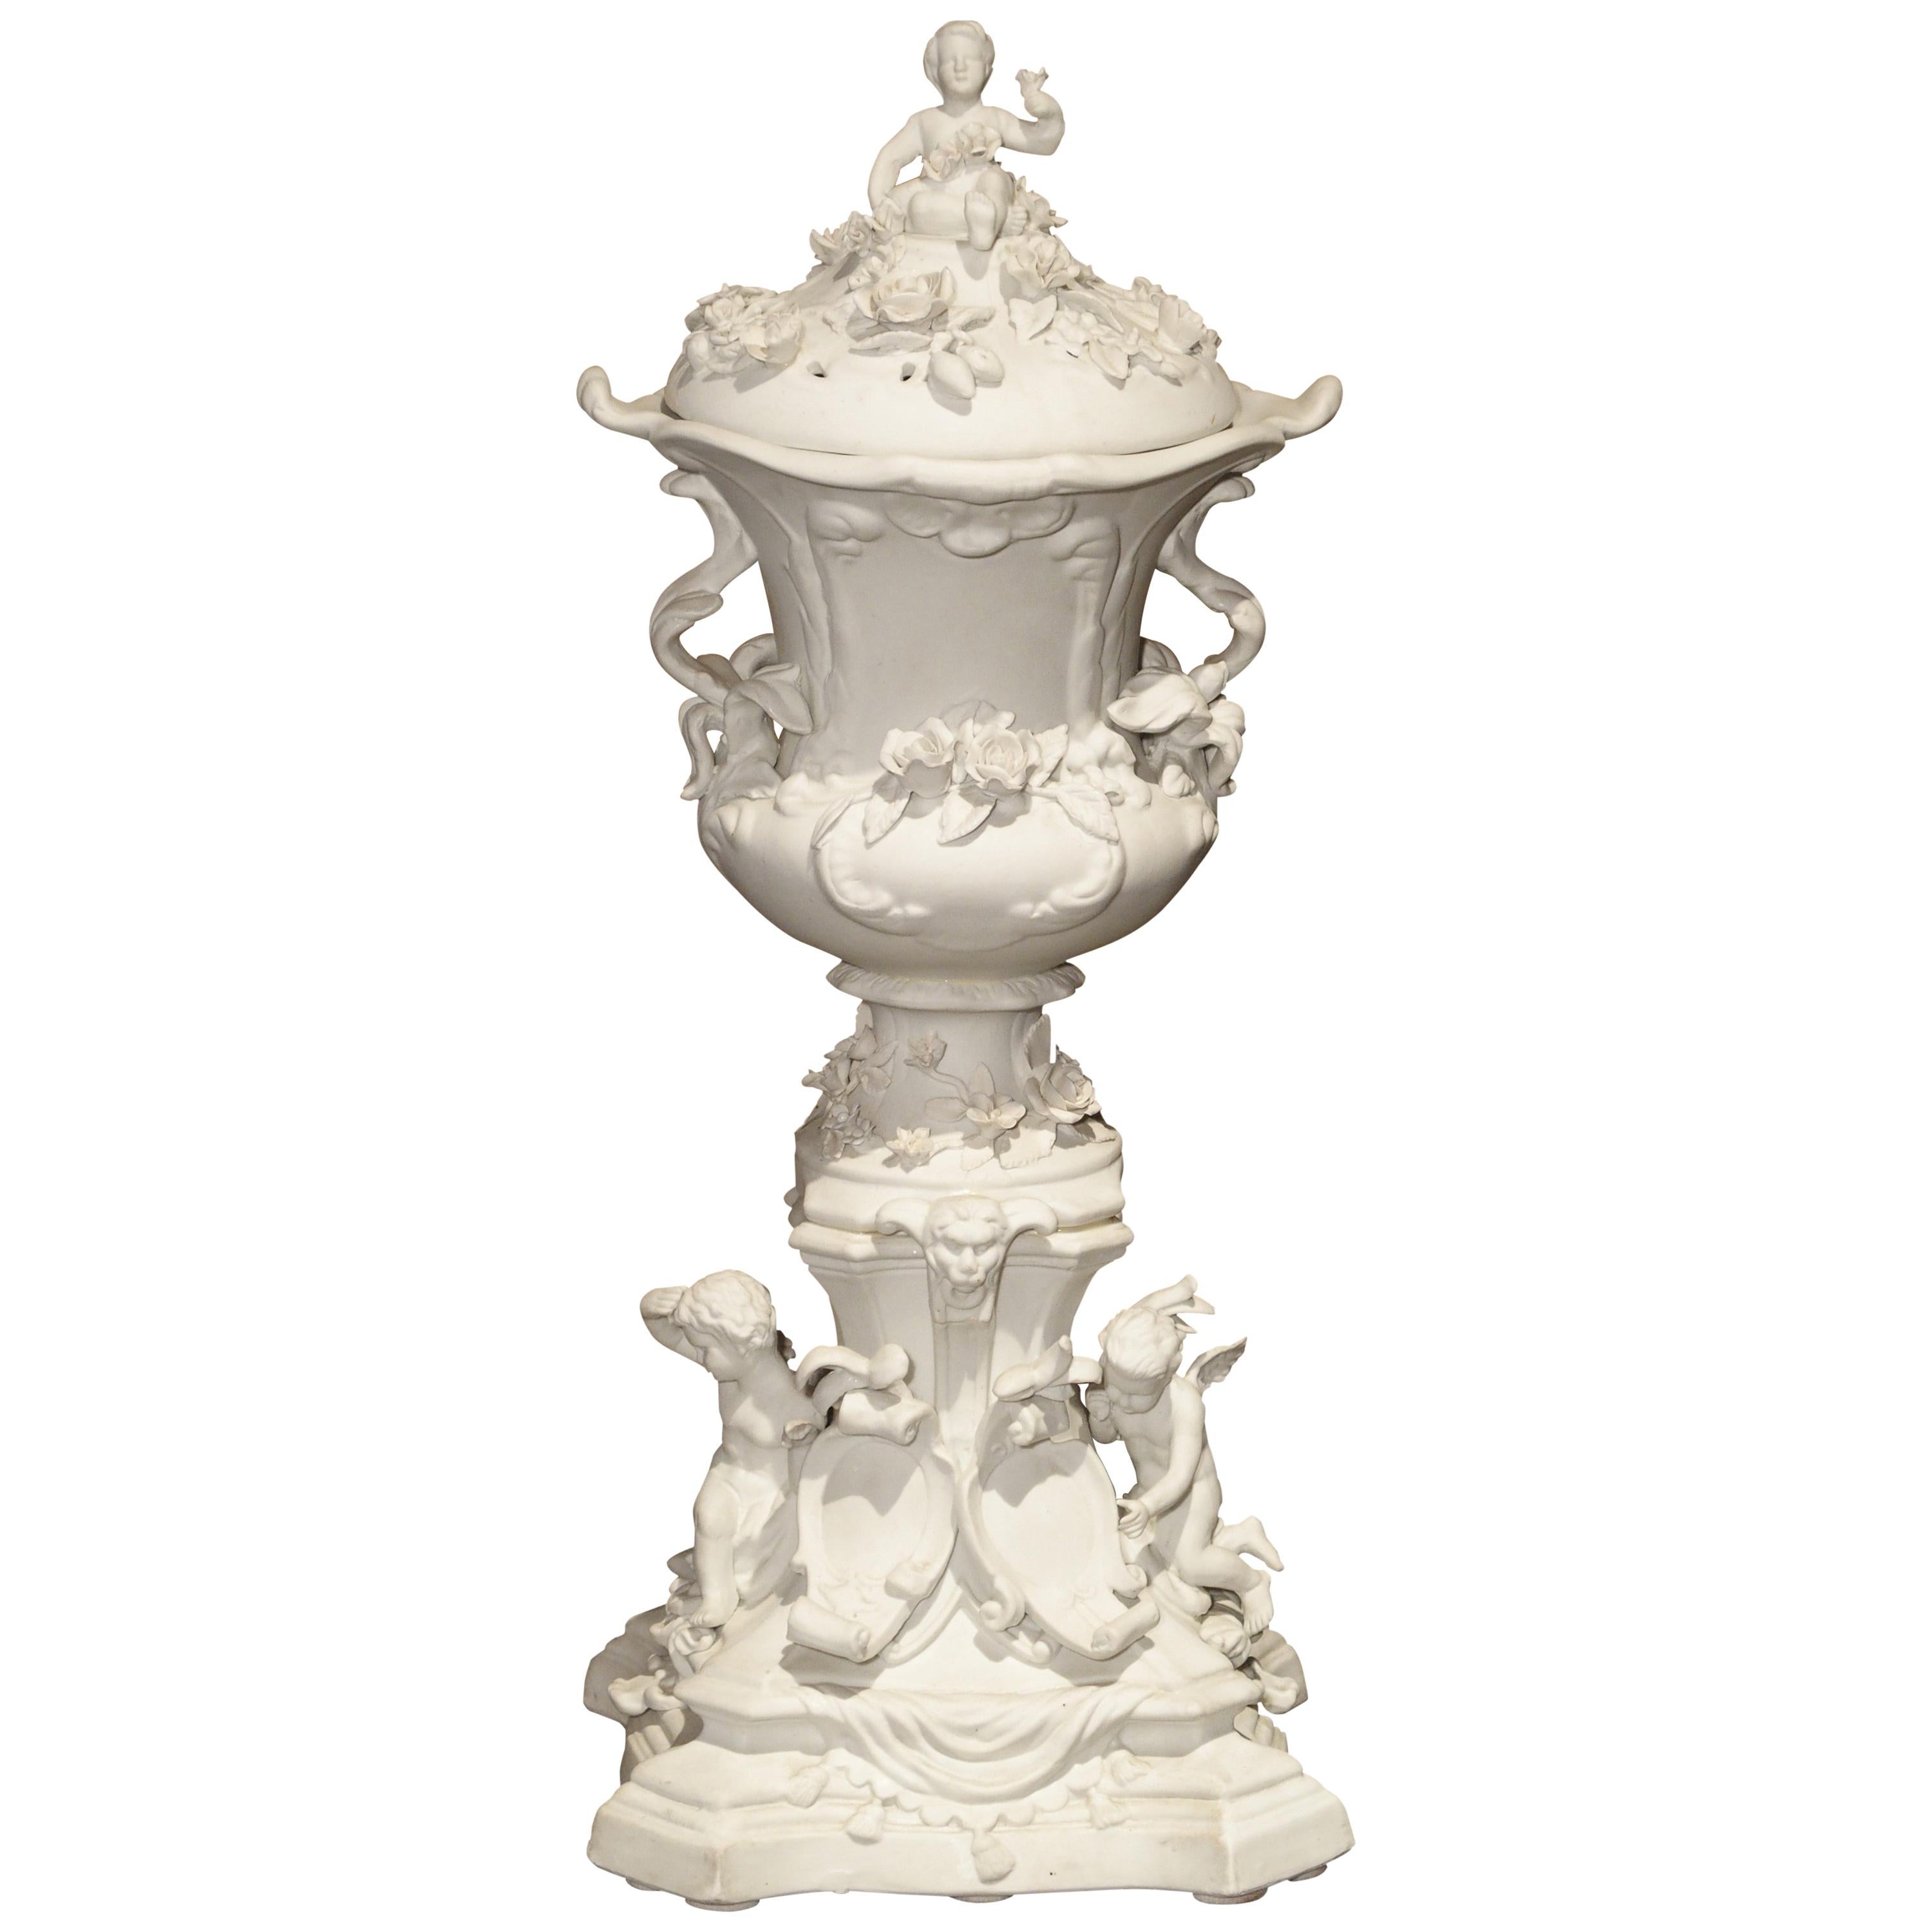 Highly Detailed Antique French Lidded Bisque Urn, Circa 1900